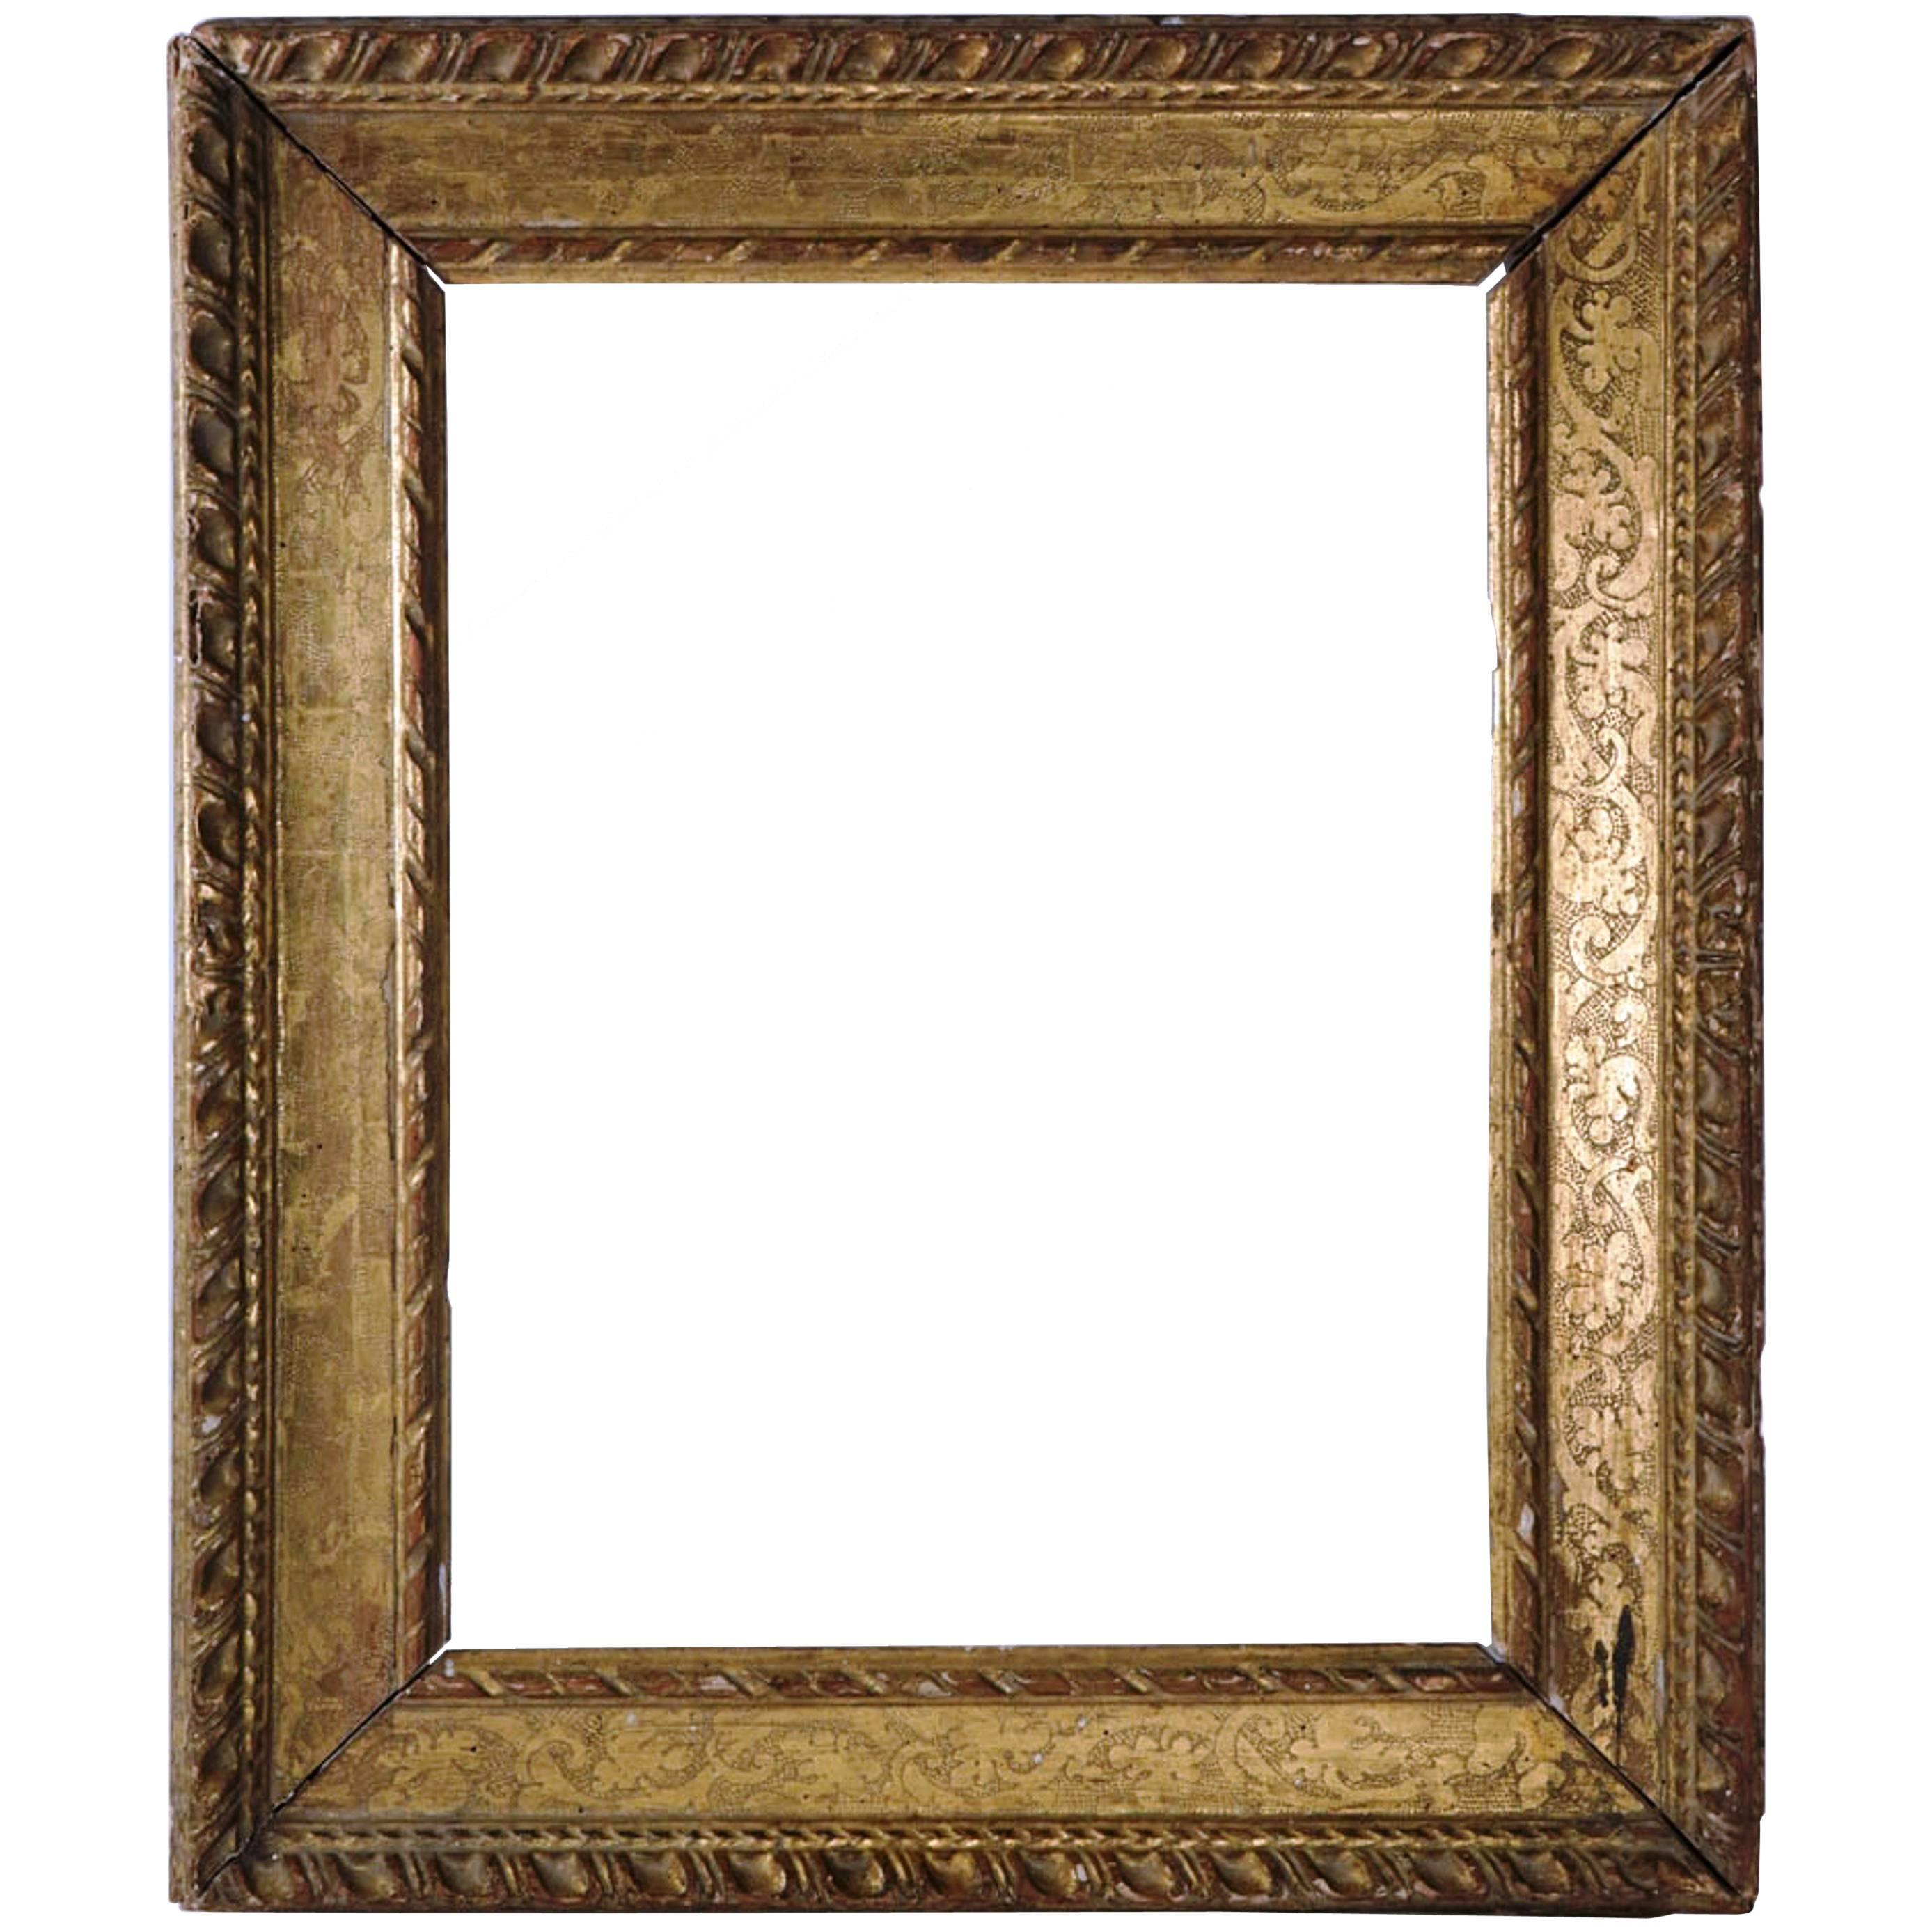 Late 16th Century Frame Mounted as Mirror, Carved Giltwood, Italy, 1580s